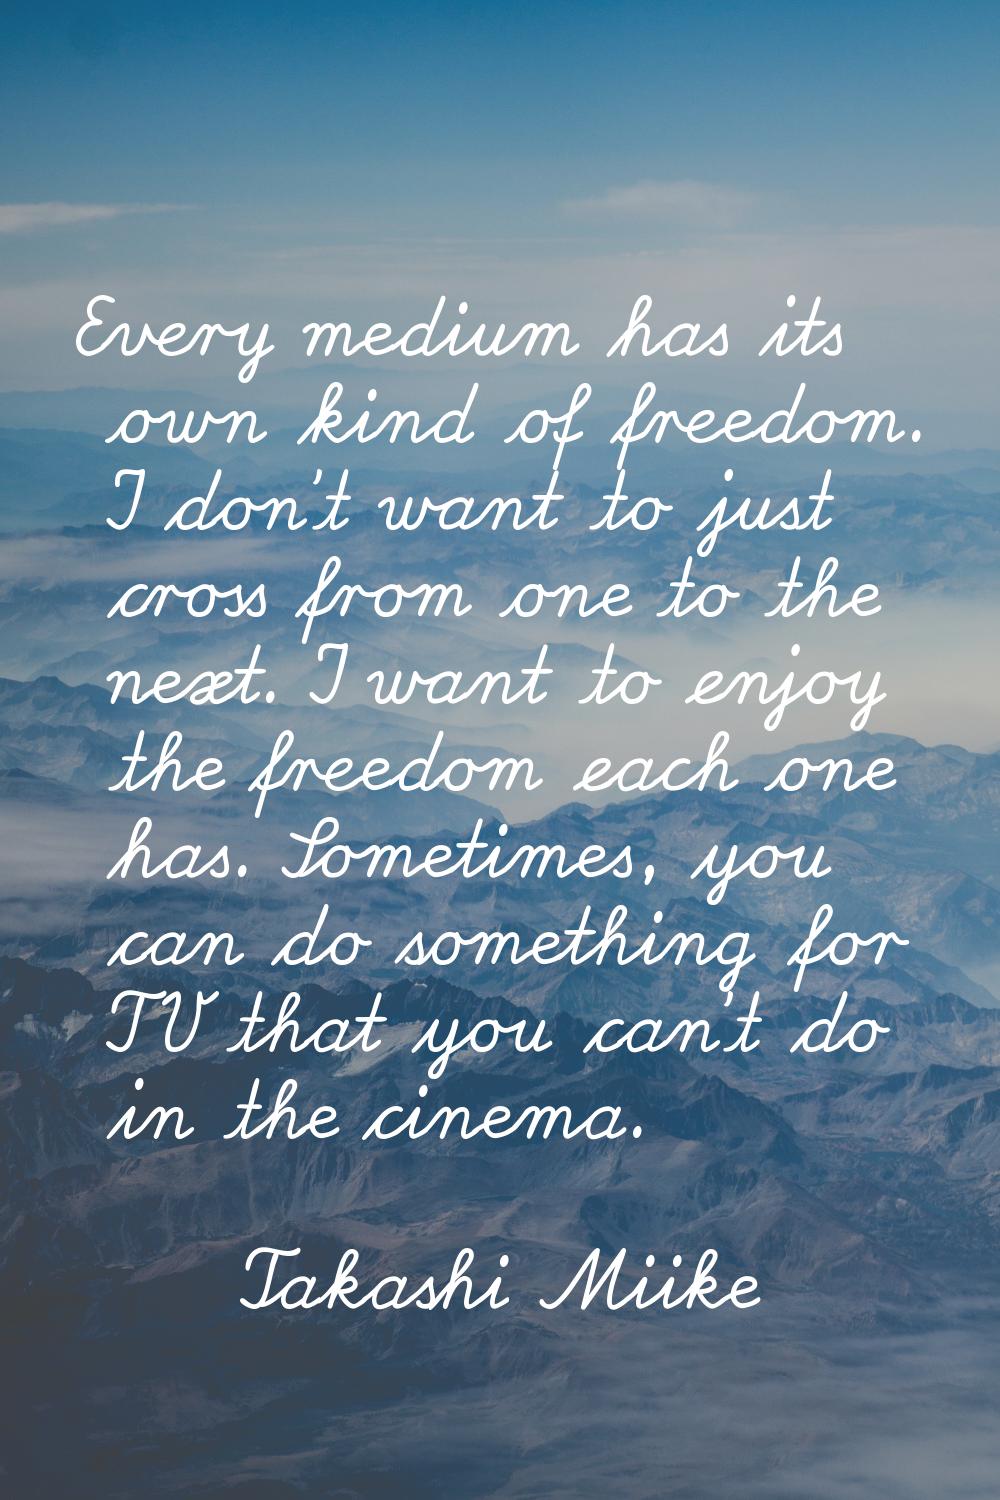 Every medium has its own kind of freedom. I don't want to just cross from one to the next. I want t